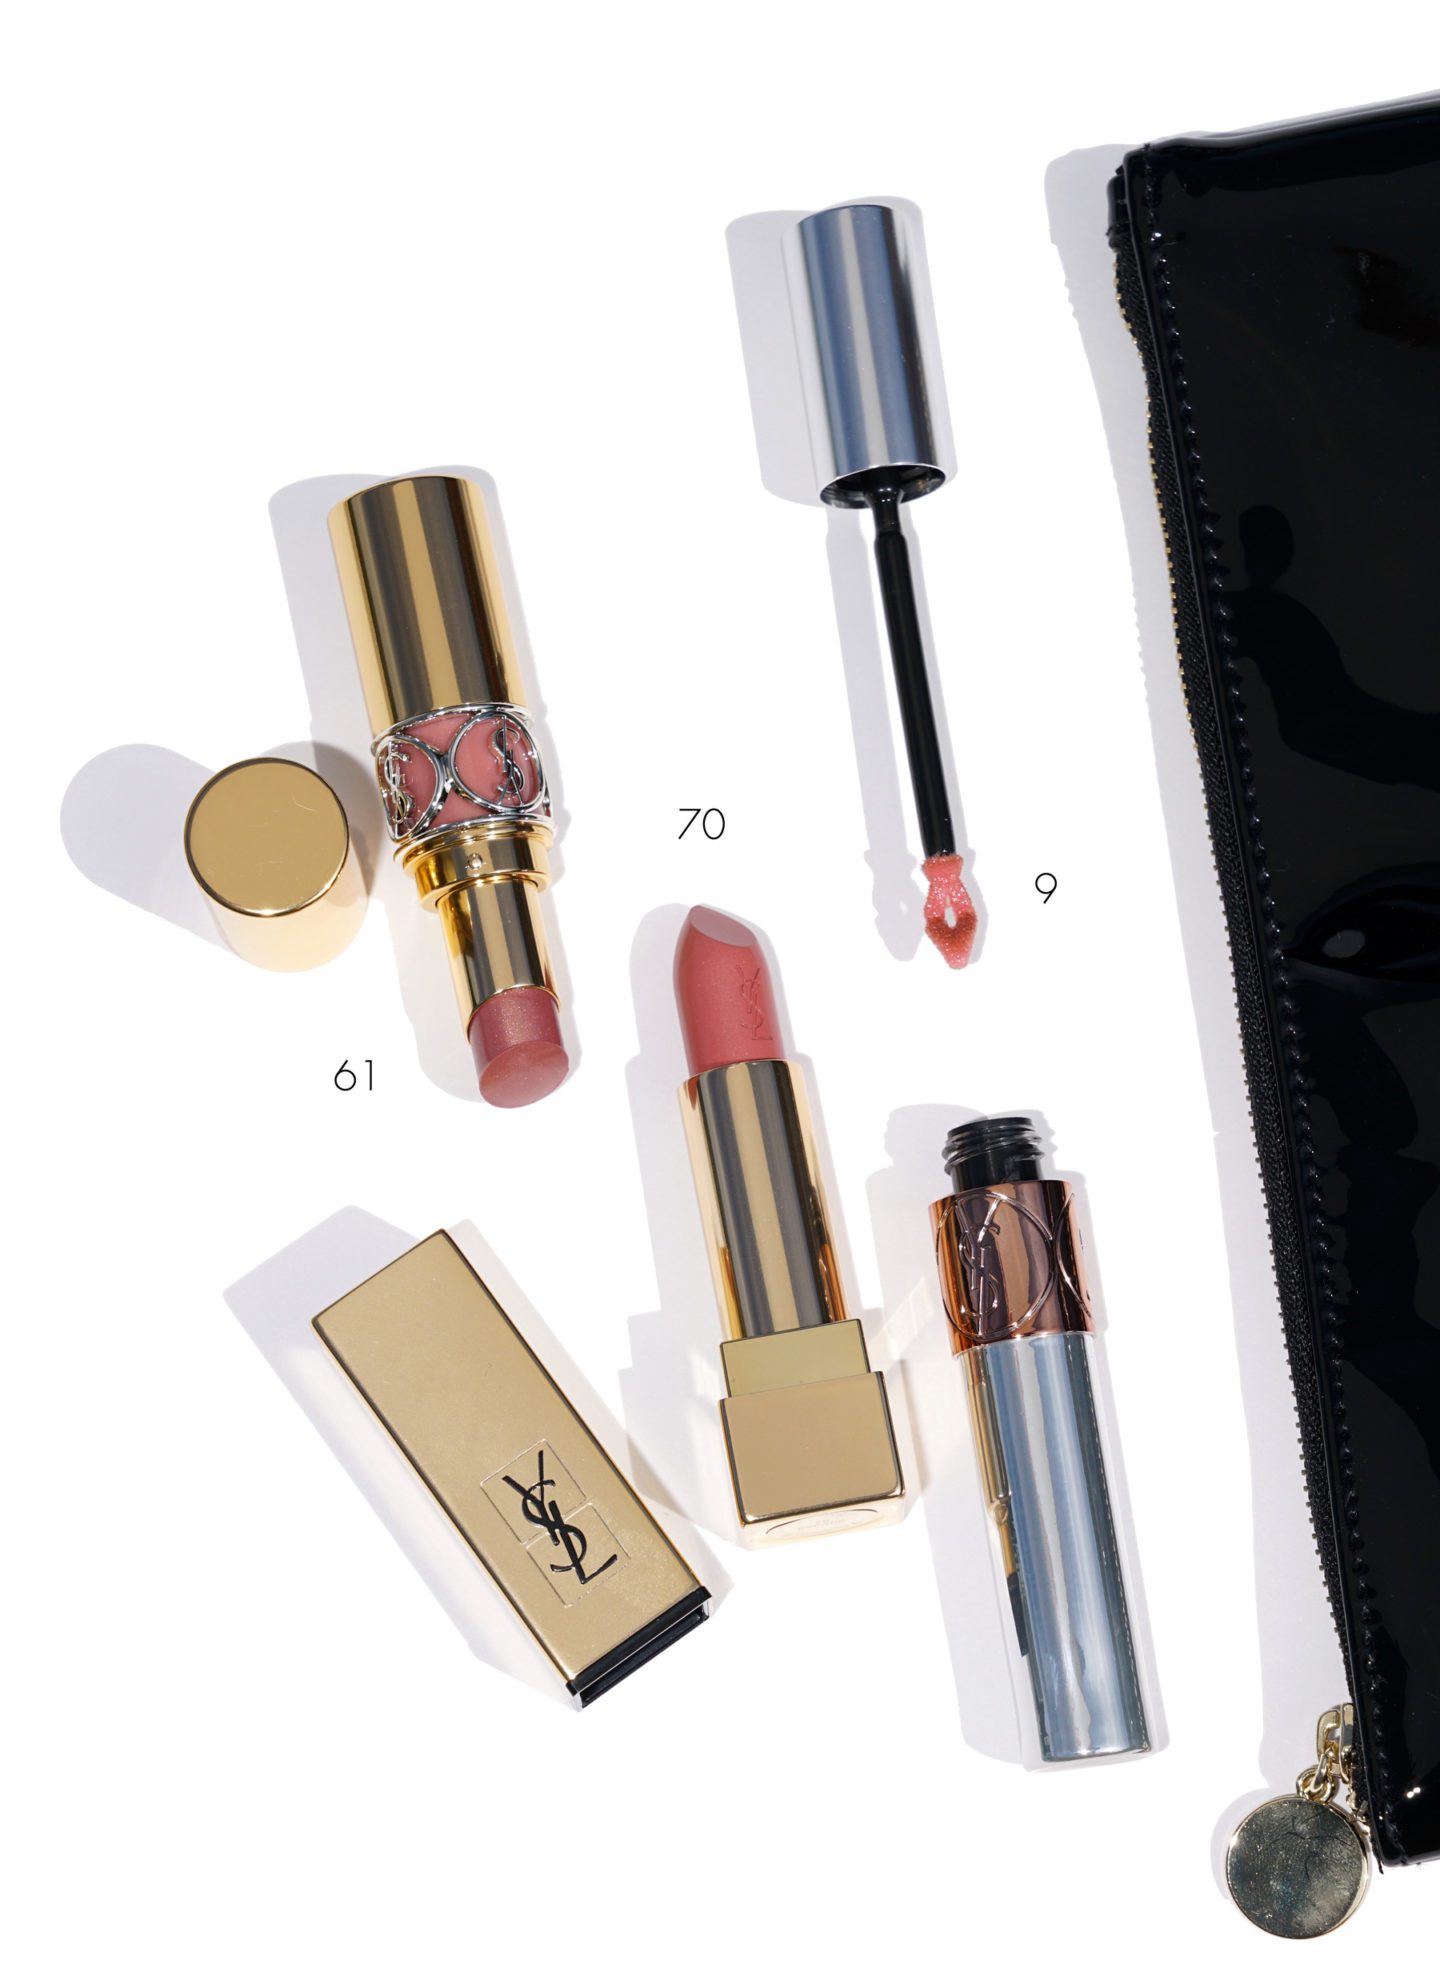 YSL Nude Lip Set Swatches Nordstrom Anniversary Sale | The Beauty Look Book